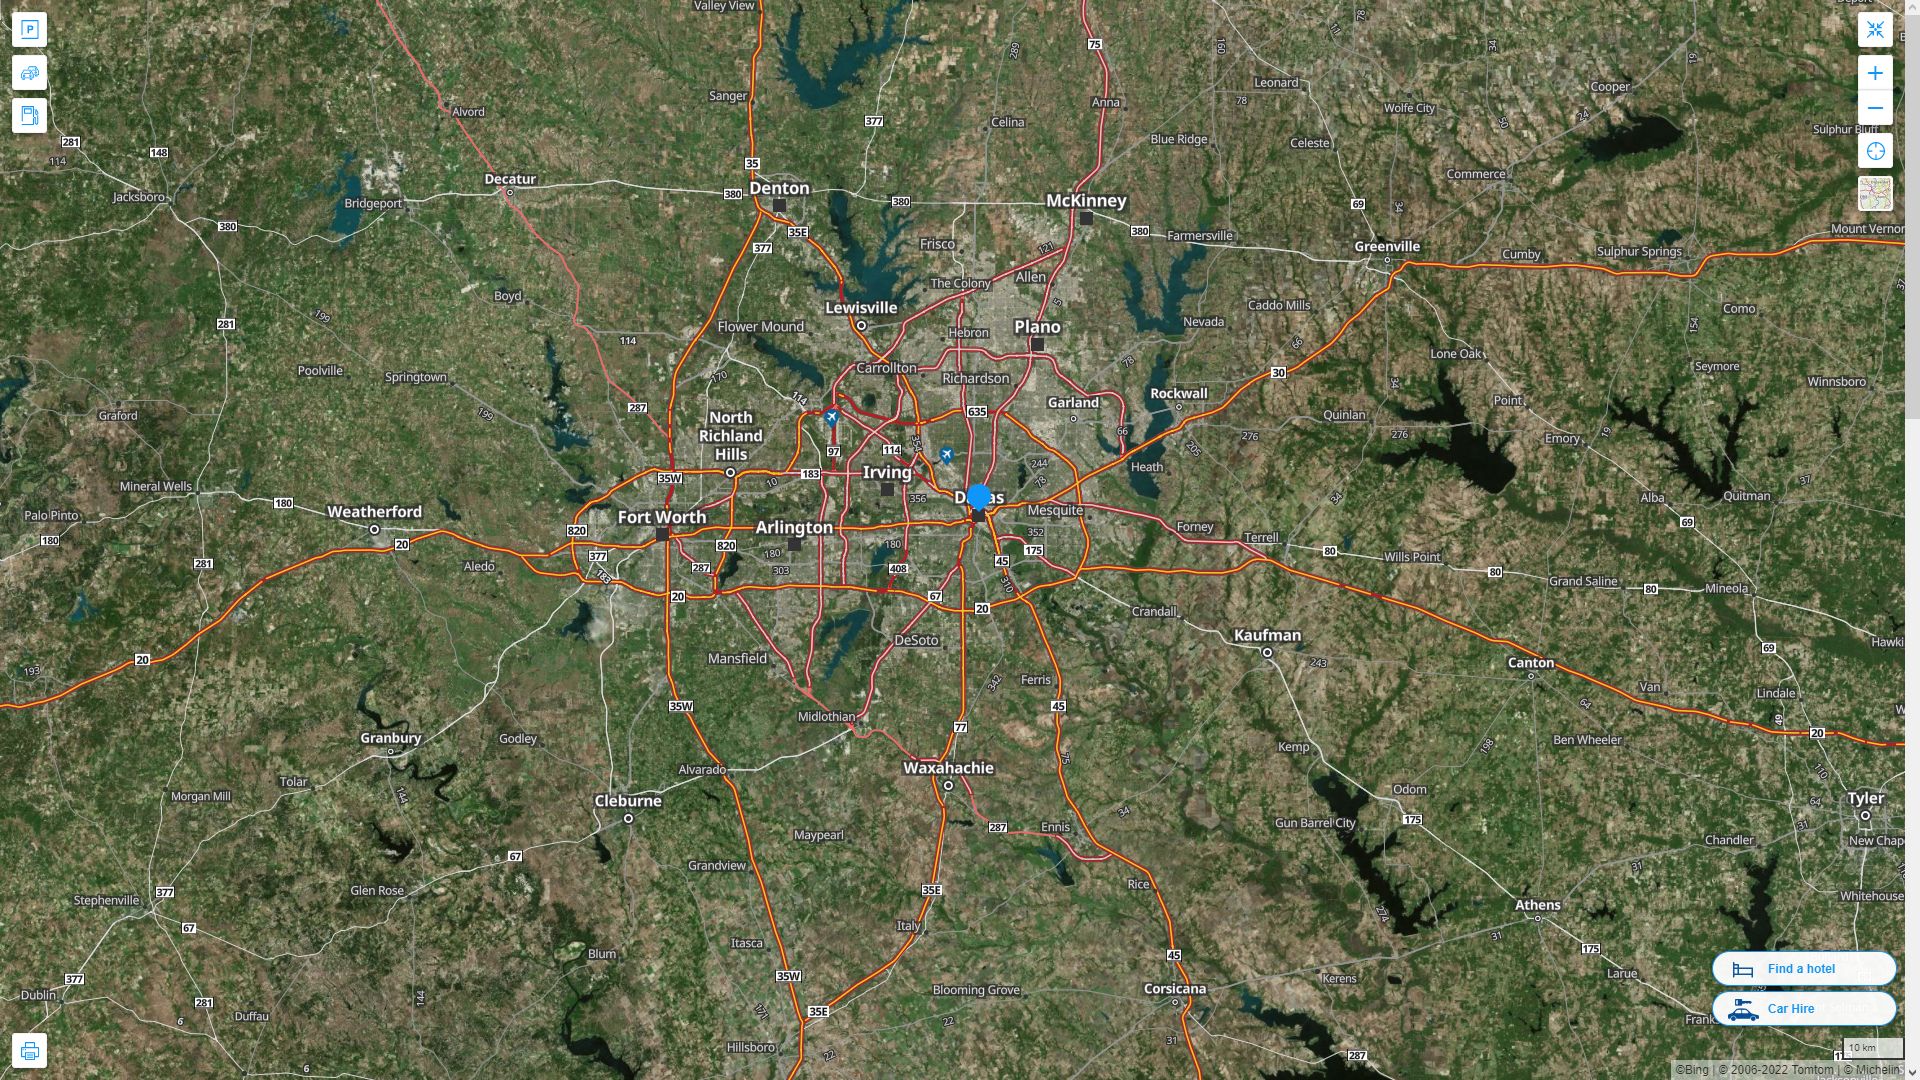 Dallas Texas Highway and Road Map with Satellite View